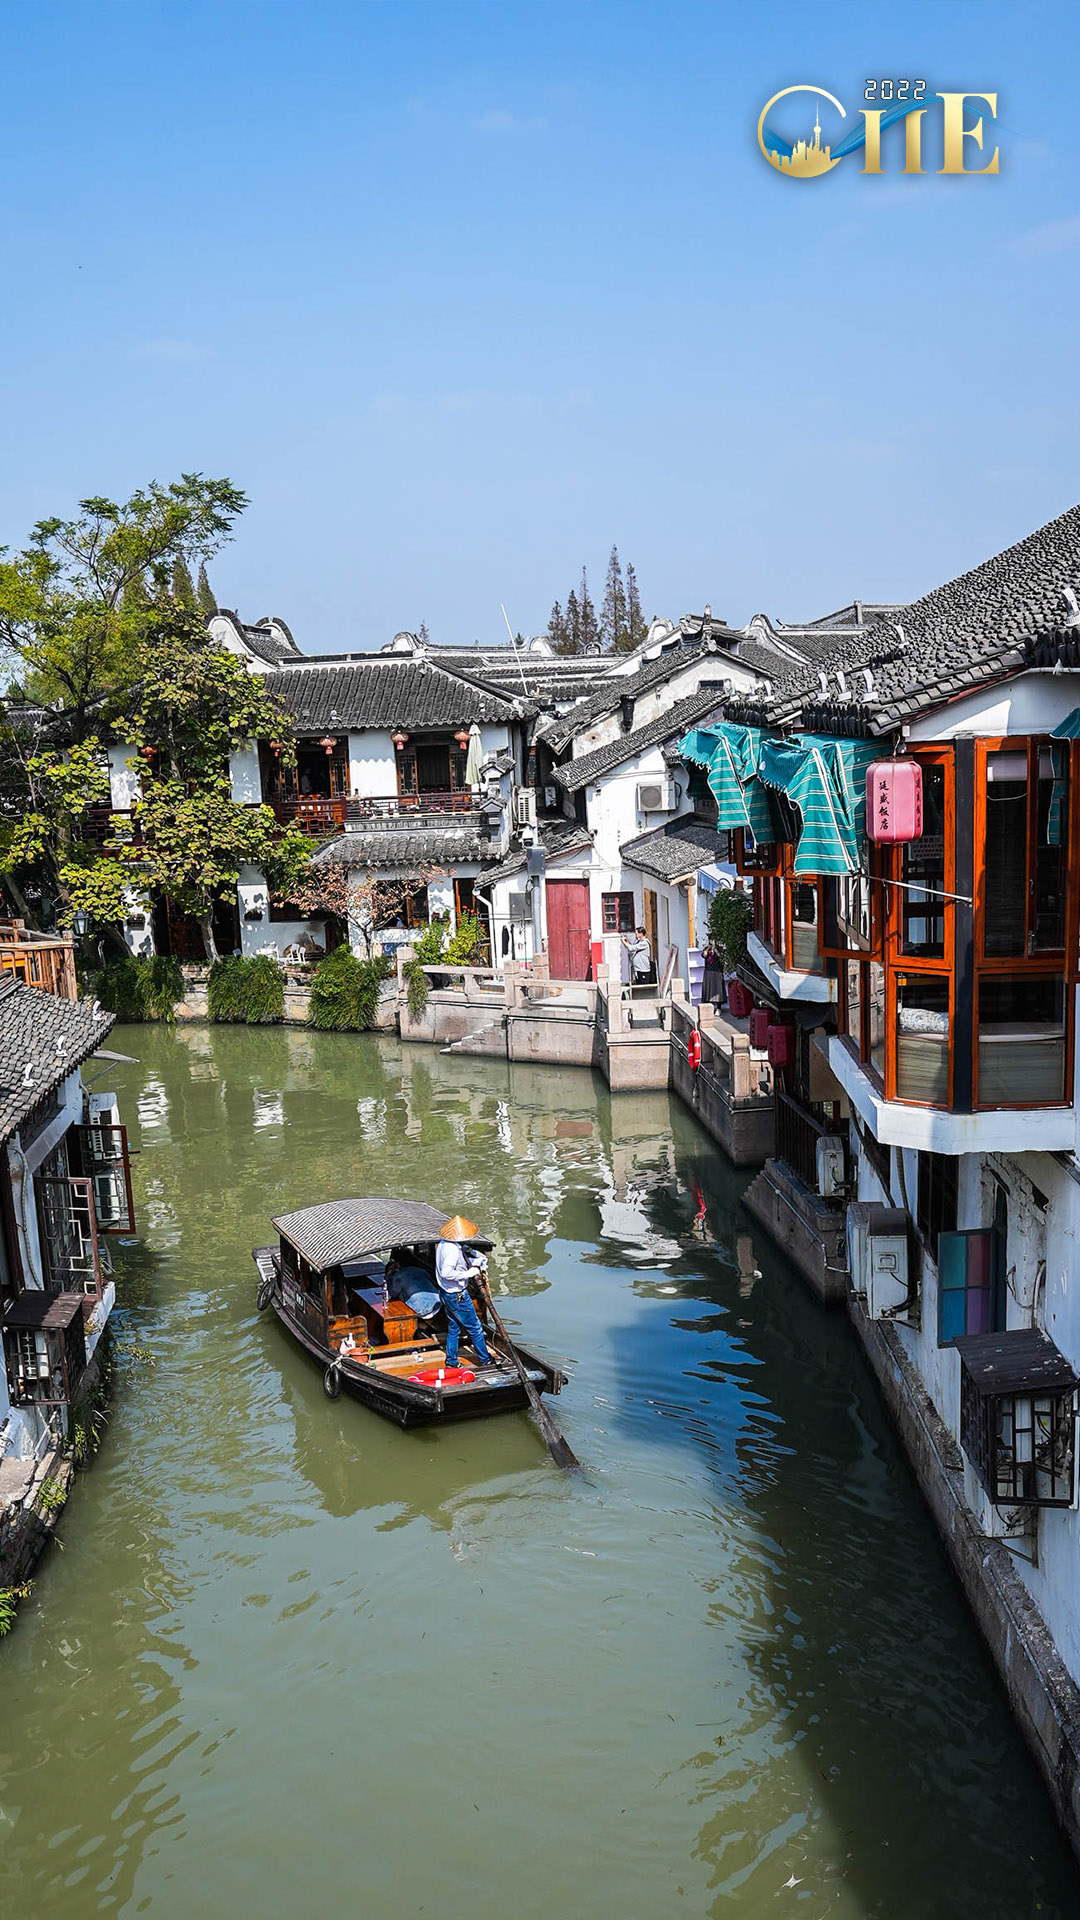 CIIE in Pictures: How the water blends with Shanghai